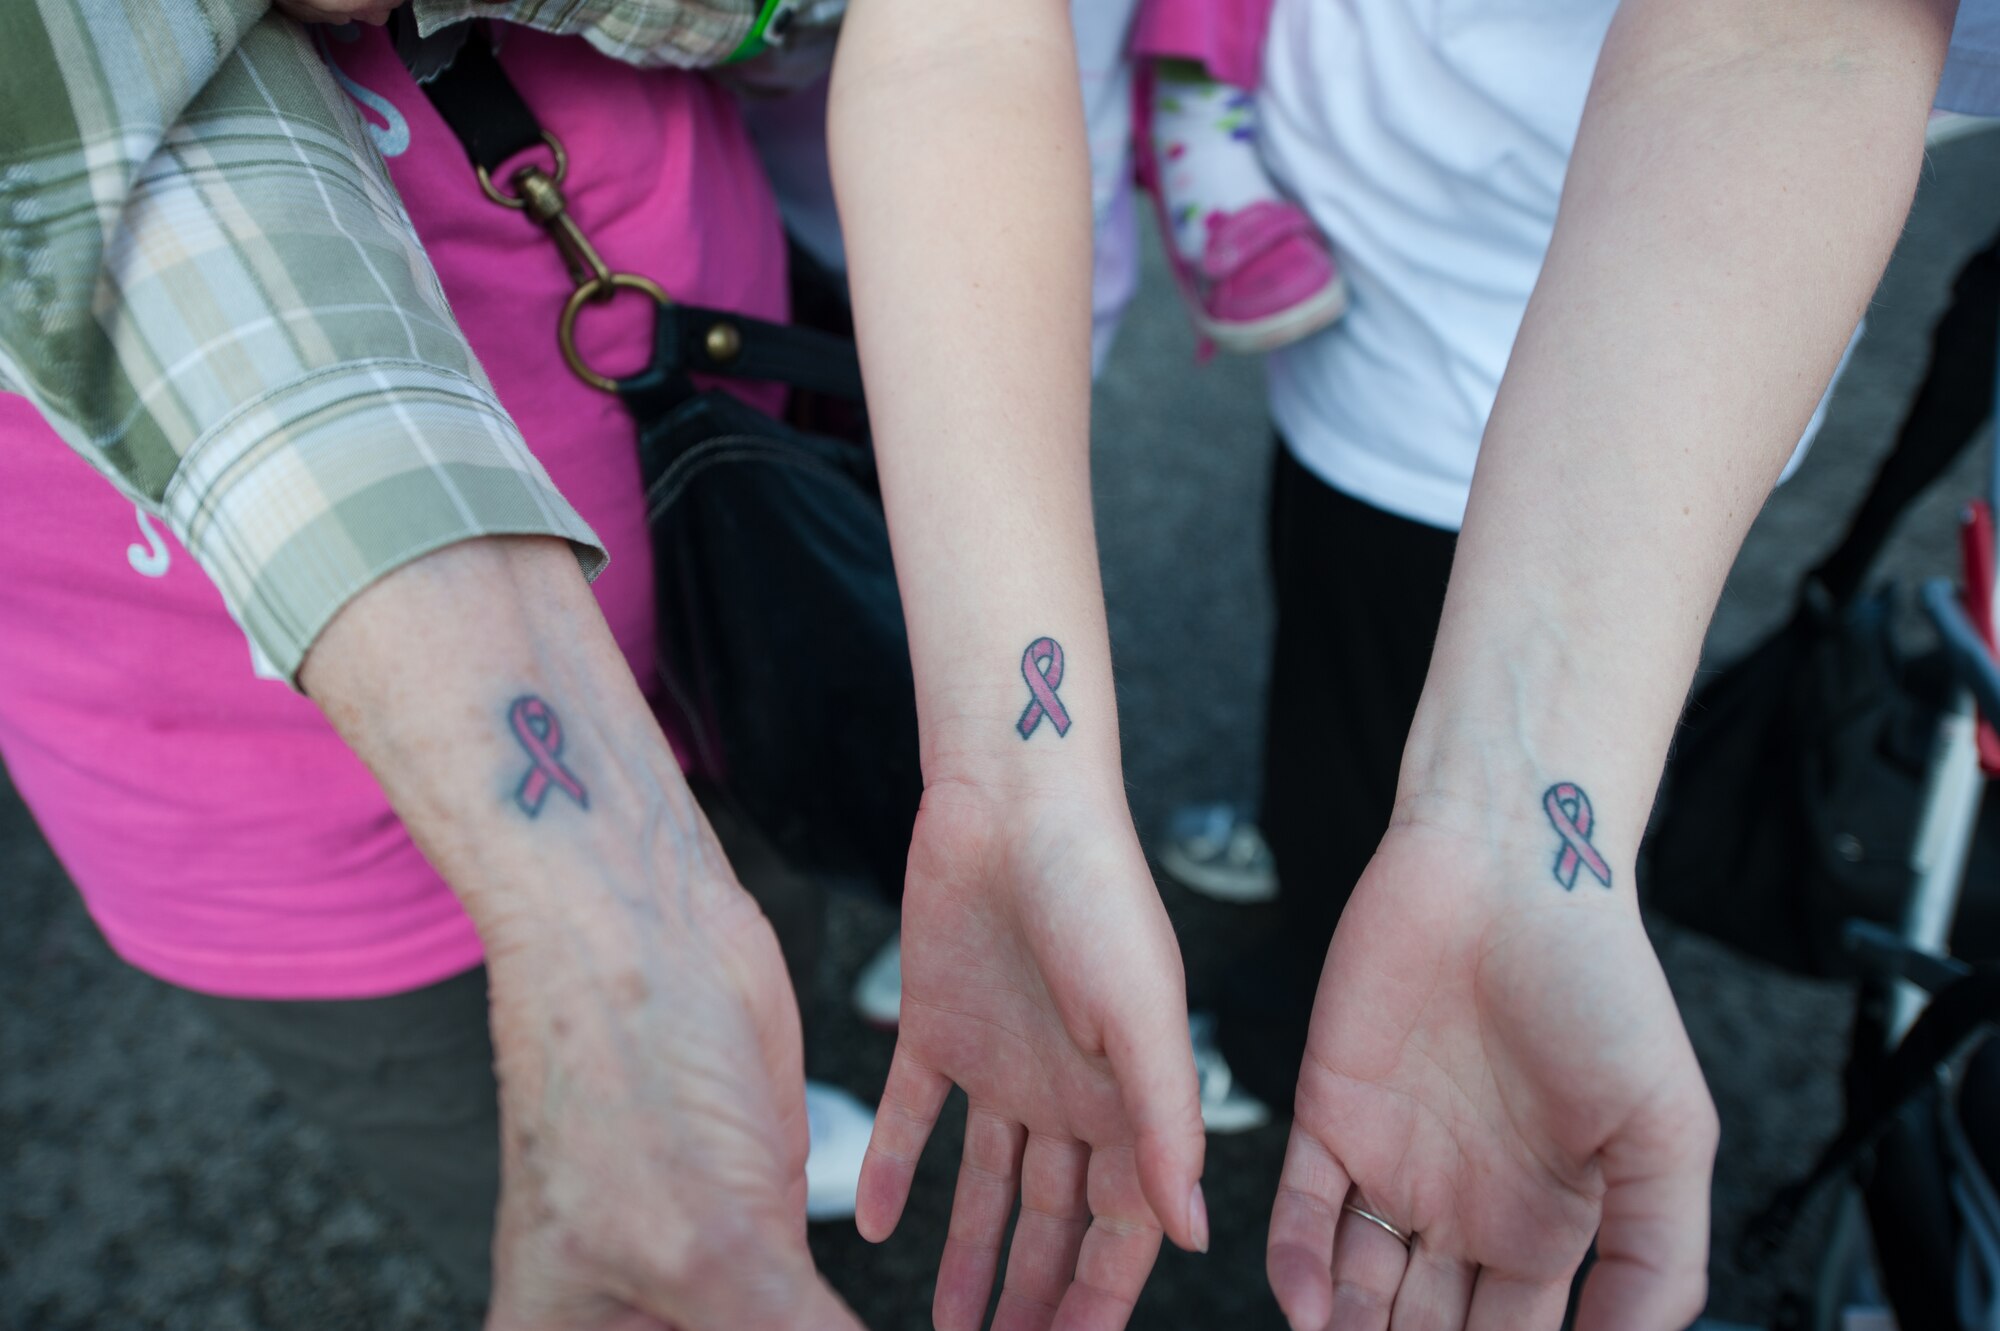 Left to right, Vera Bowman, Carolyn Lyon and Jen Navarro display tattoos they received last year in celebration of Vera surviving cancer as they participate in the 2011 annual Susan G. Komen Race for the Cure in Boise, Idaho, May 7th. All three are participating as part of the Idaho National Guard’s official team, “Guardians.” The Guardians team includes 13 participants from various units of both the Idaho Army and Air National Guard.